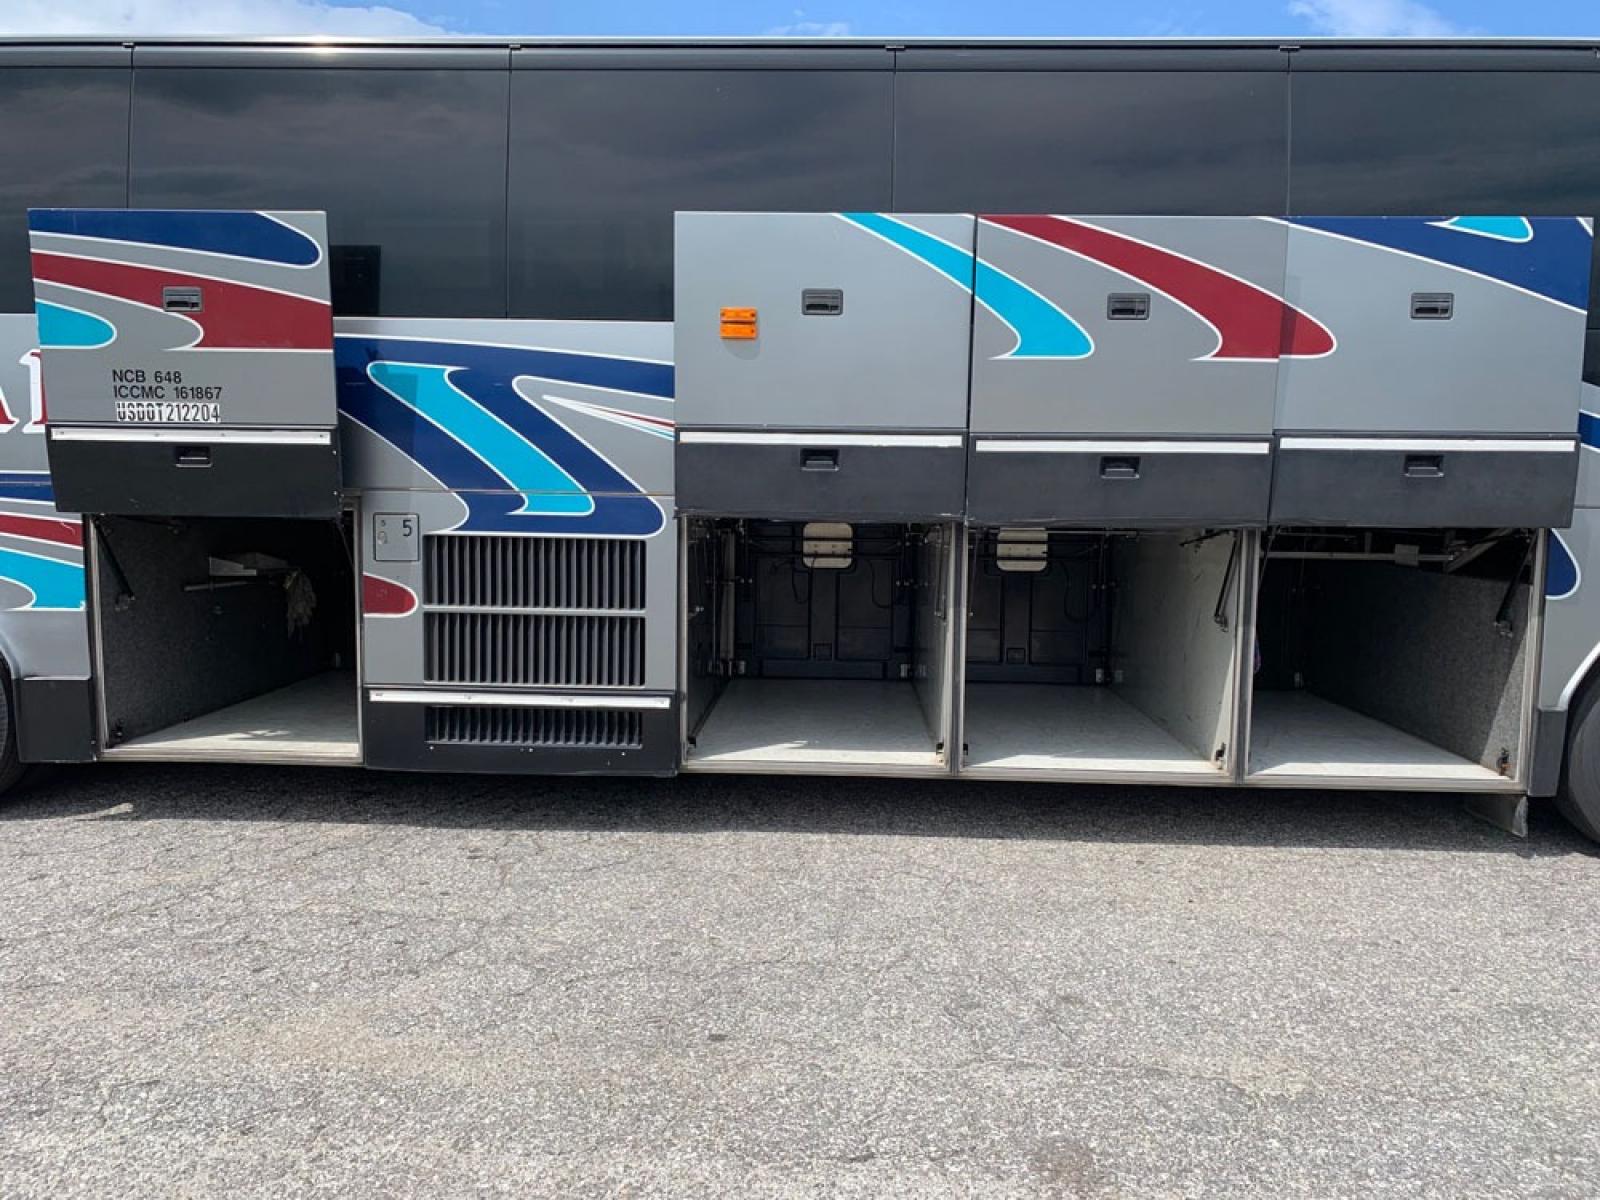 1998 Prevost HS-45 with an Detroit Diesel Series 60 engine, Allison transmission, 0.000000, 0.000000 - 1998 Prevost H3-45 - Series 60 Detroit Diesel - Allison Automatic Transmission - 45' - 56 Passengers -Enclosed Parcel Racks - 5 Flat Screens and DVD - Photo #11